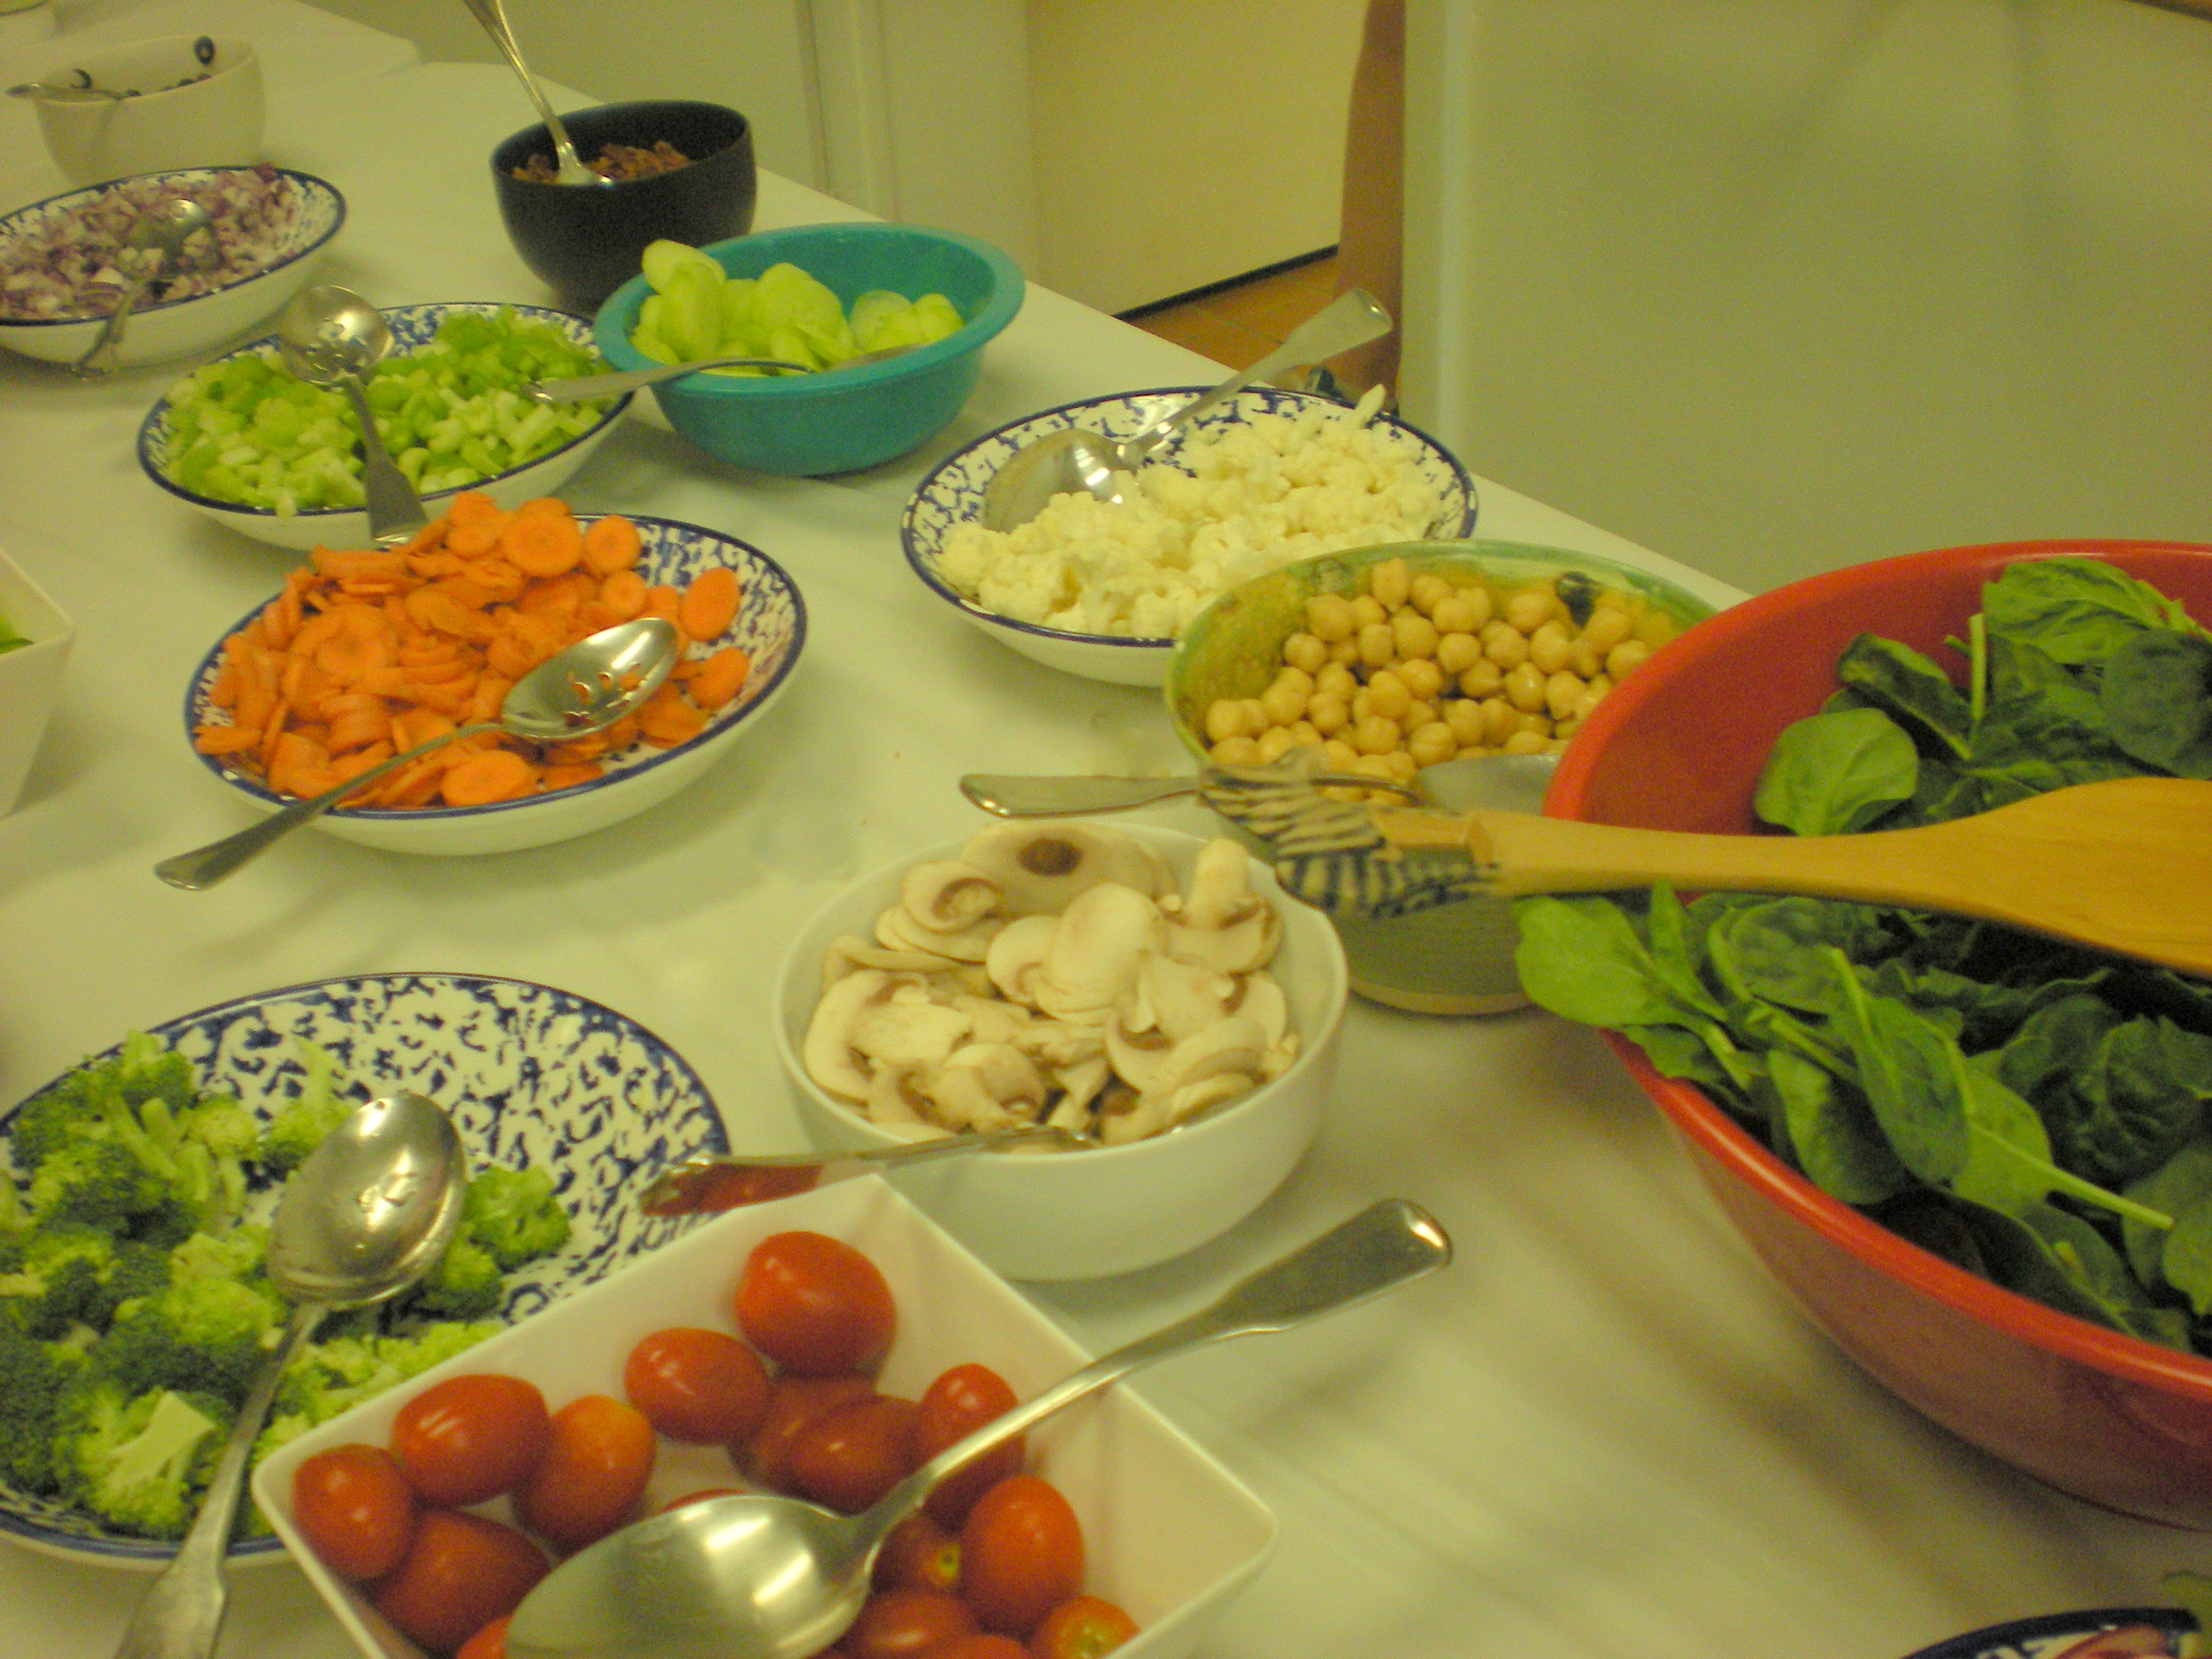 Just a small portion of the many salad offerings....